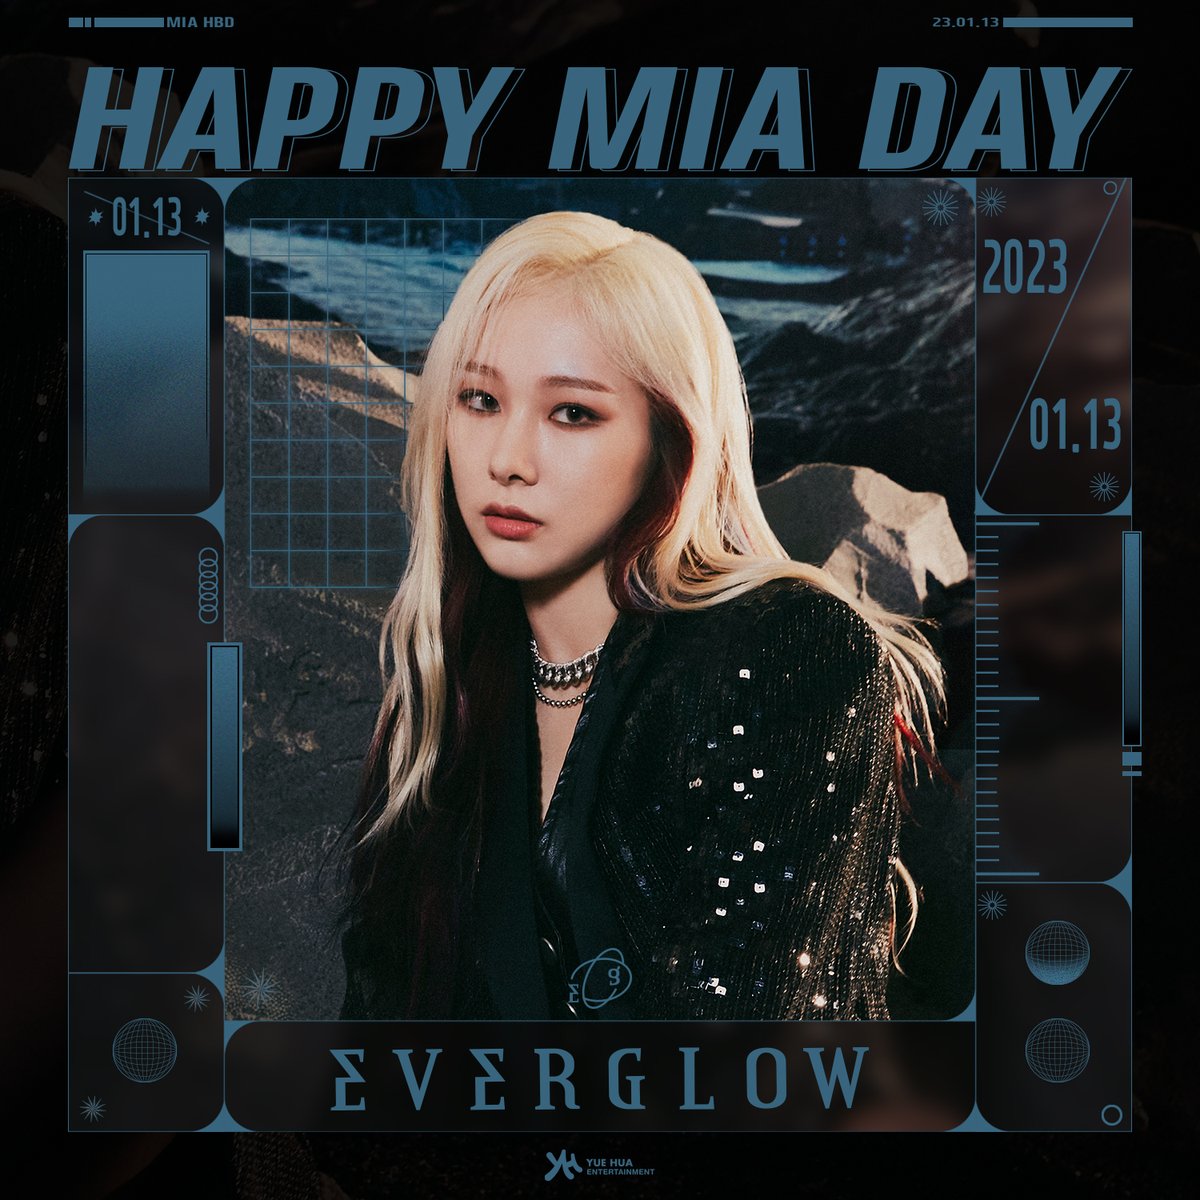 Image for [🎉EVERGLOW DAY] 2023.01.13 